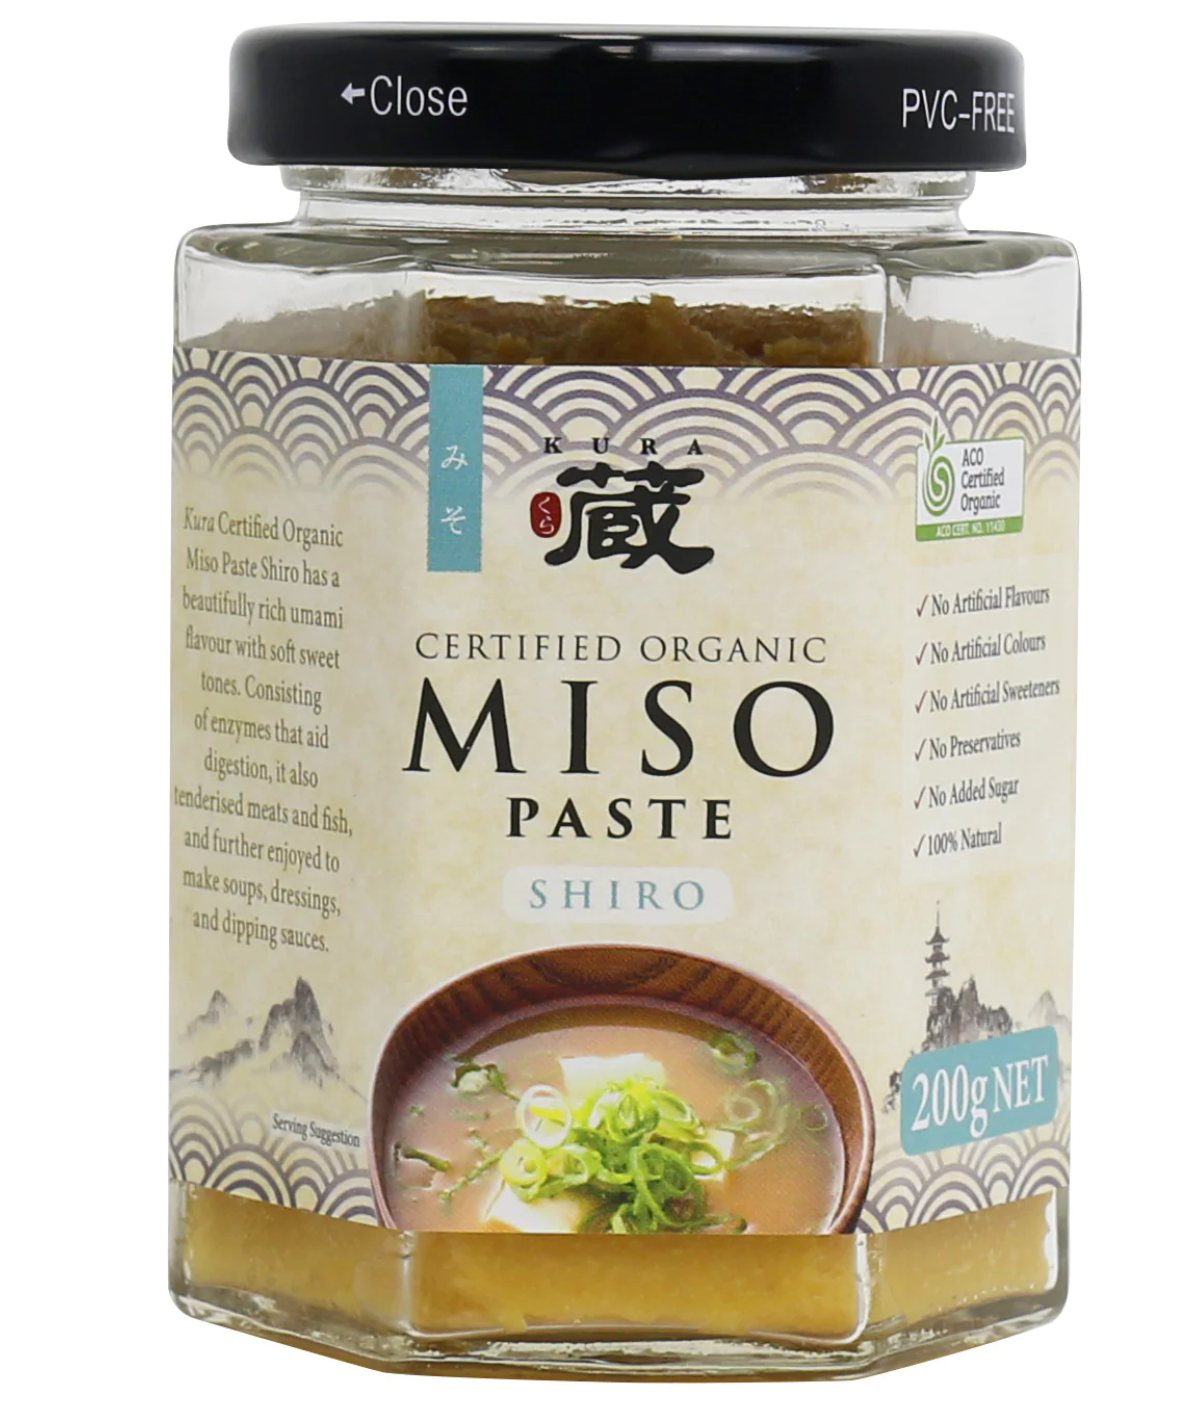 Miso and Herb Pate